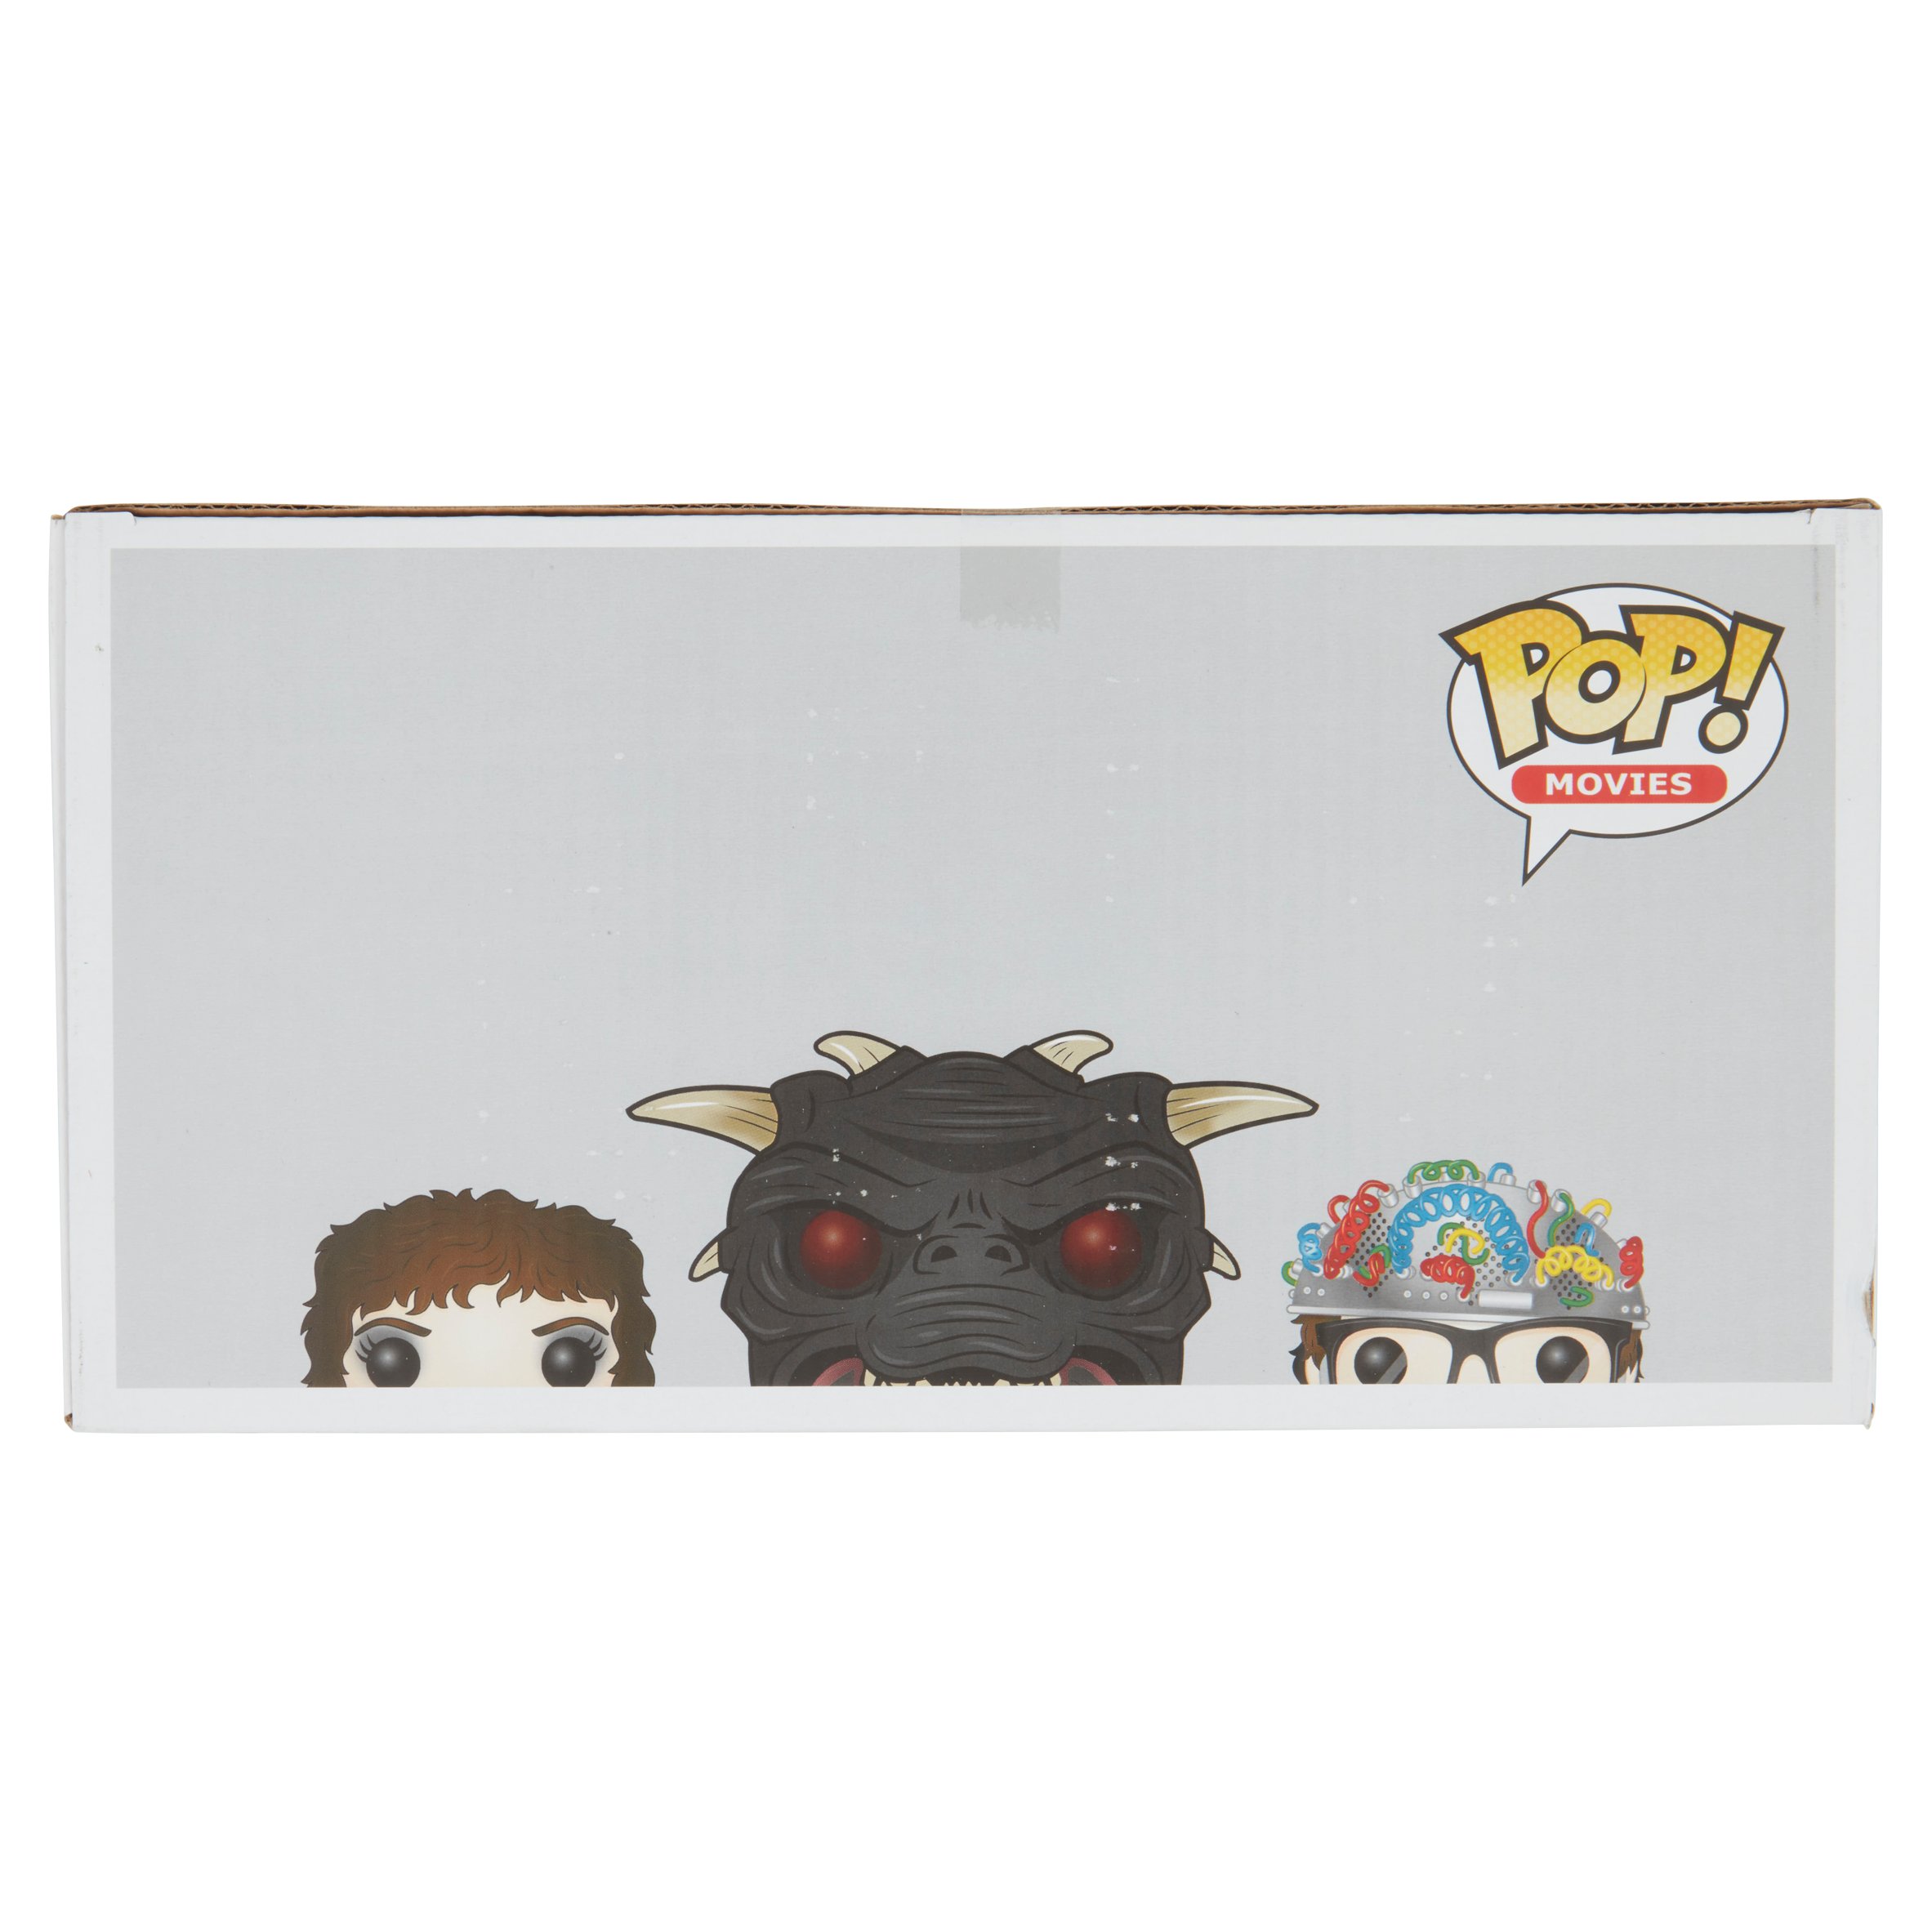 POP Movies: Classic Ghostbusters 3 Pack Walmart Exclusive, The Gatekeeper, Zuul, The Key Master - image 2 of 6